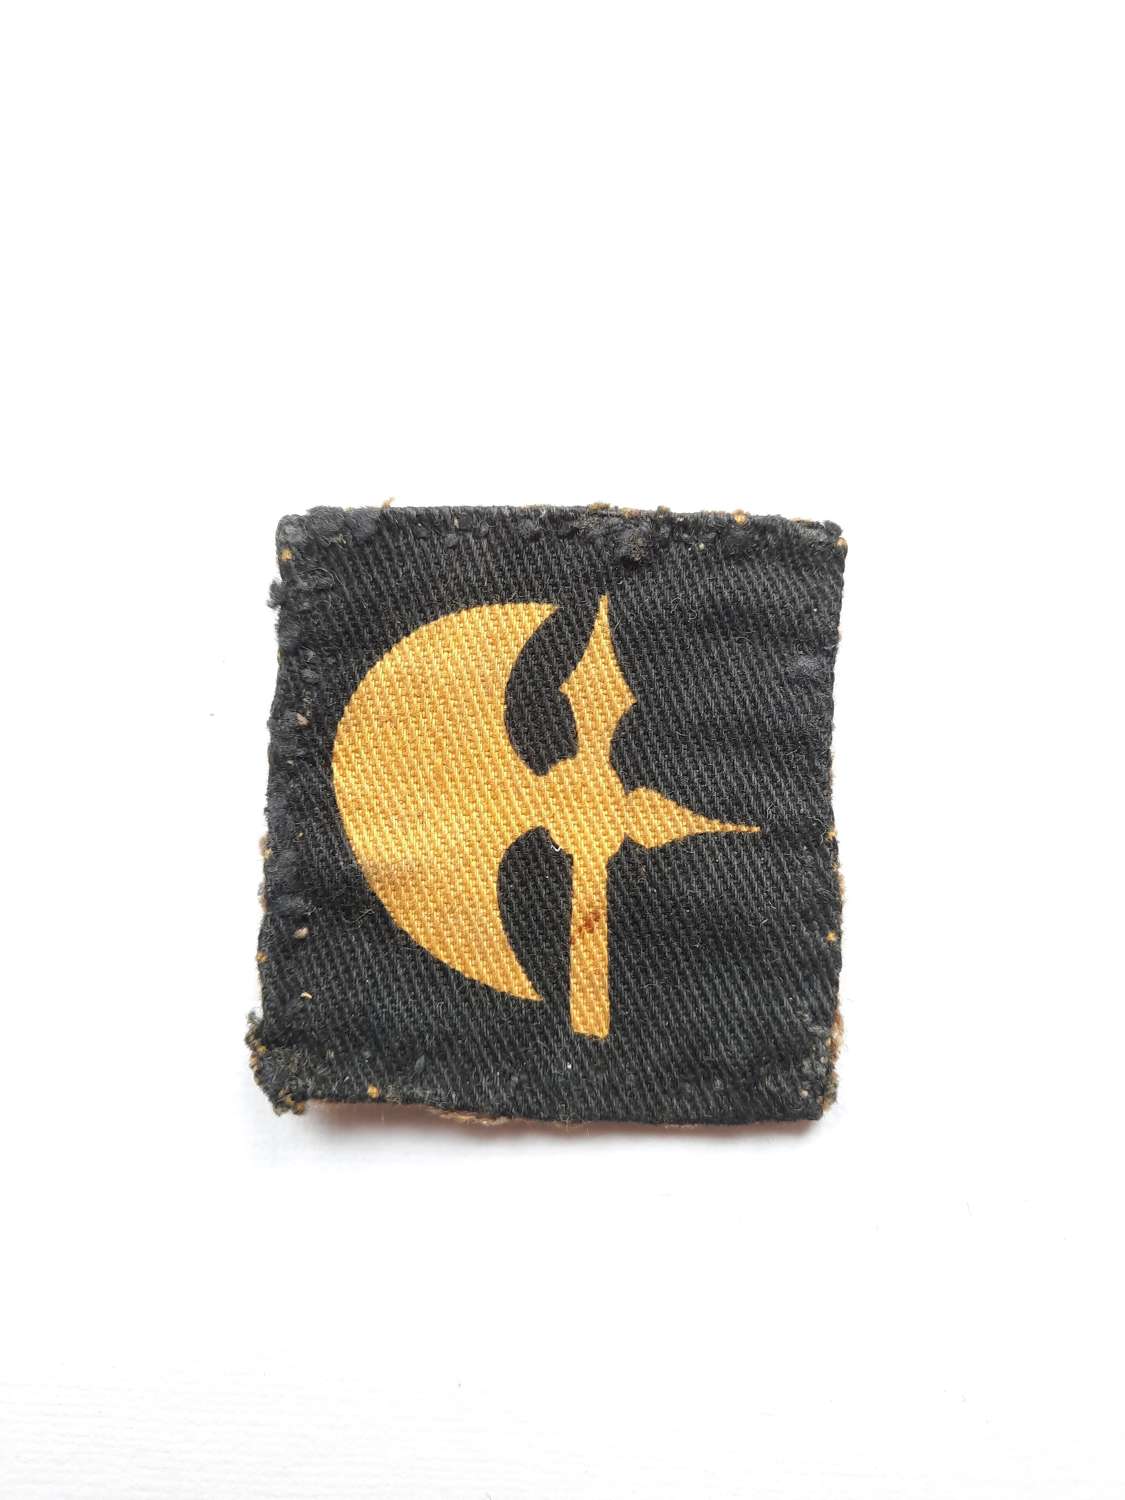 78th Infantry Division printed patch